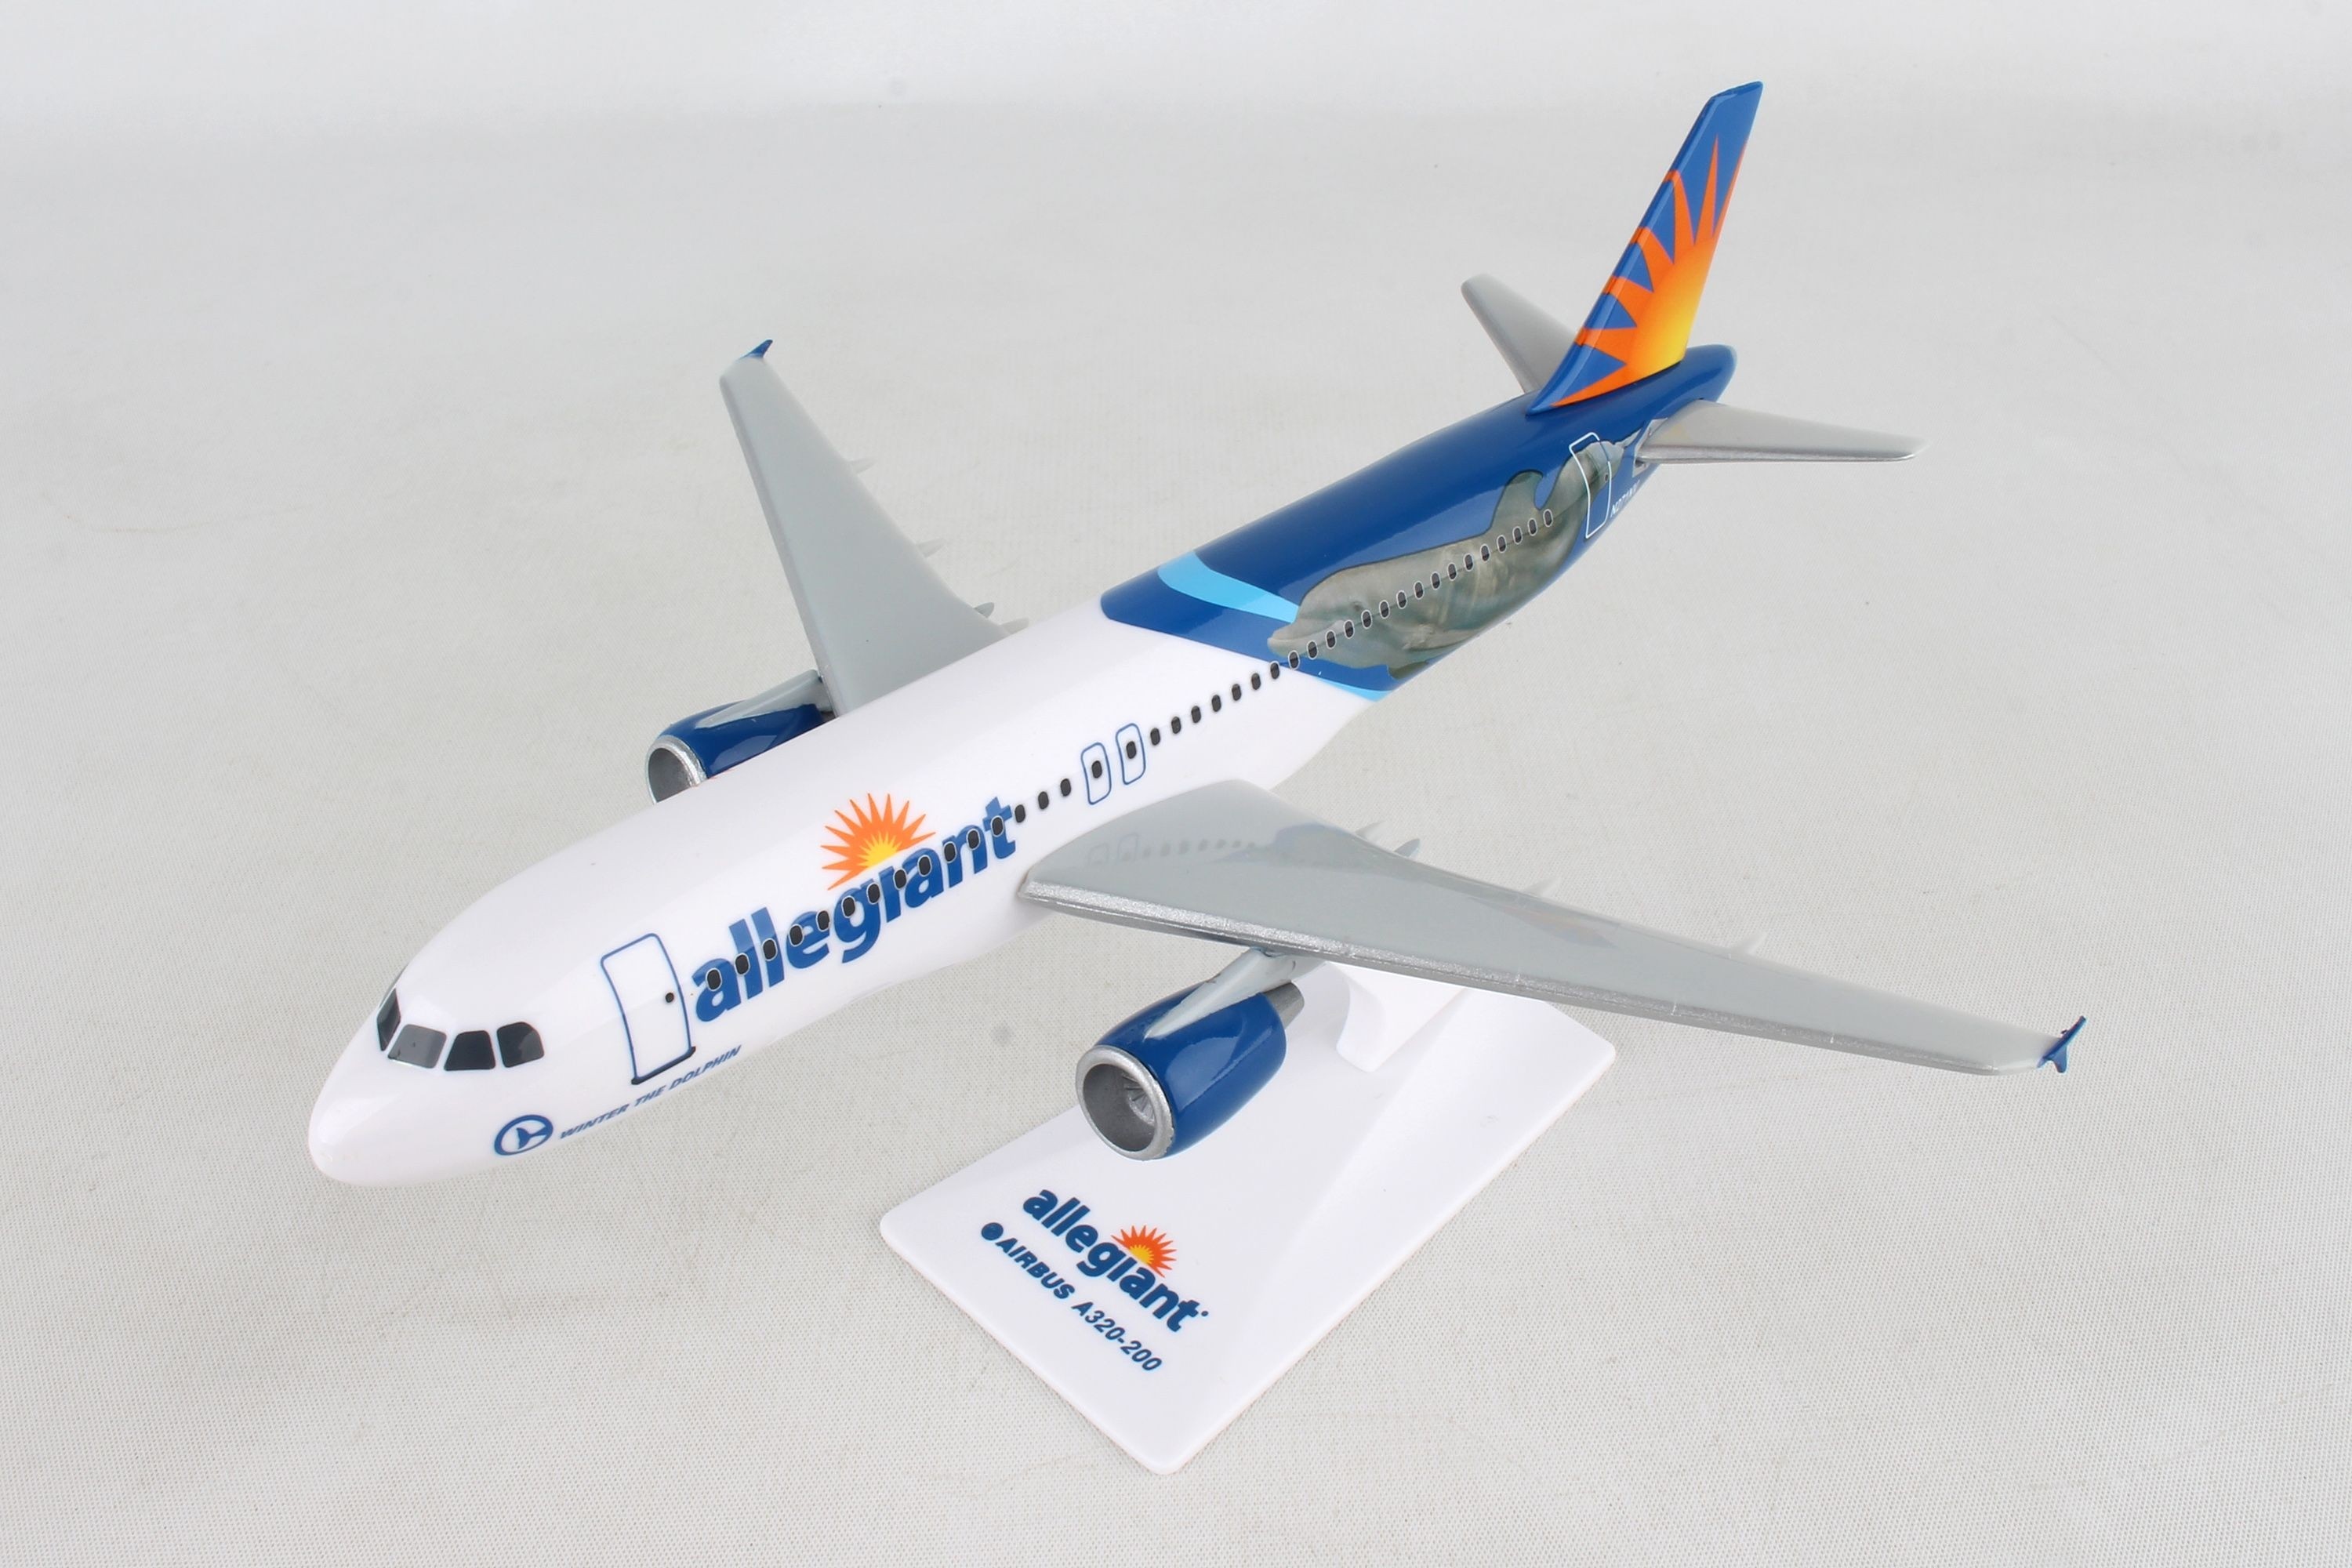 Allegiant Airbus A320 N271NV Winter the Dolphin Flight Miniatures